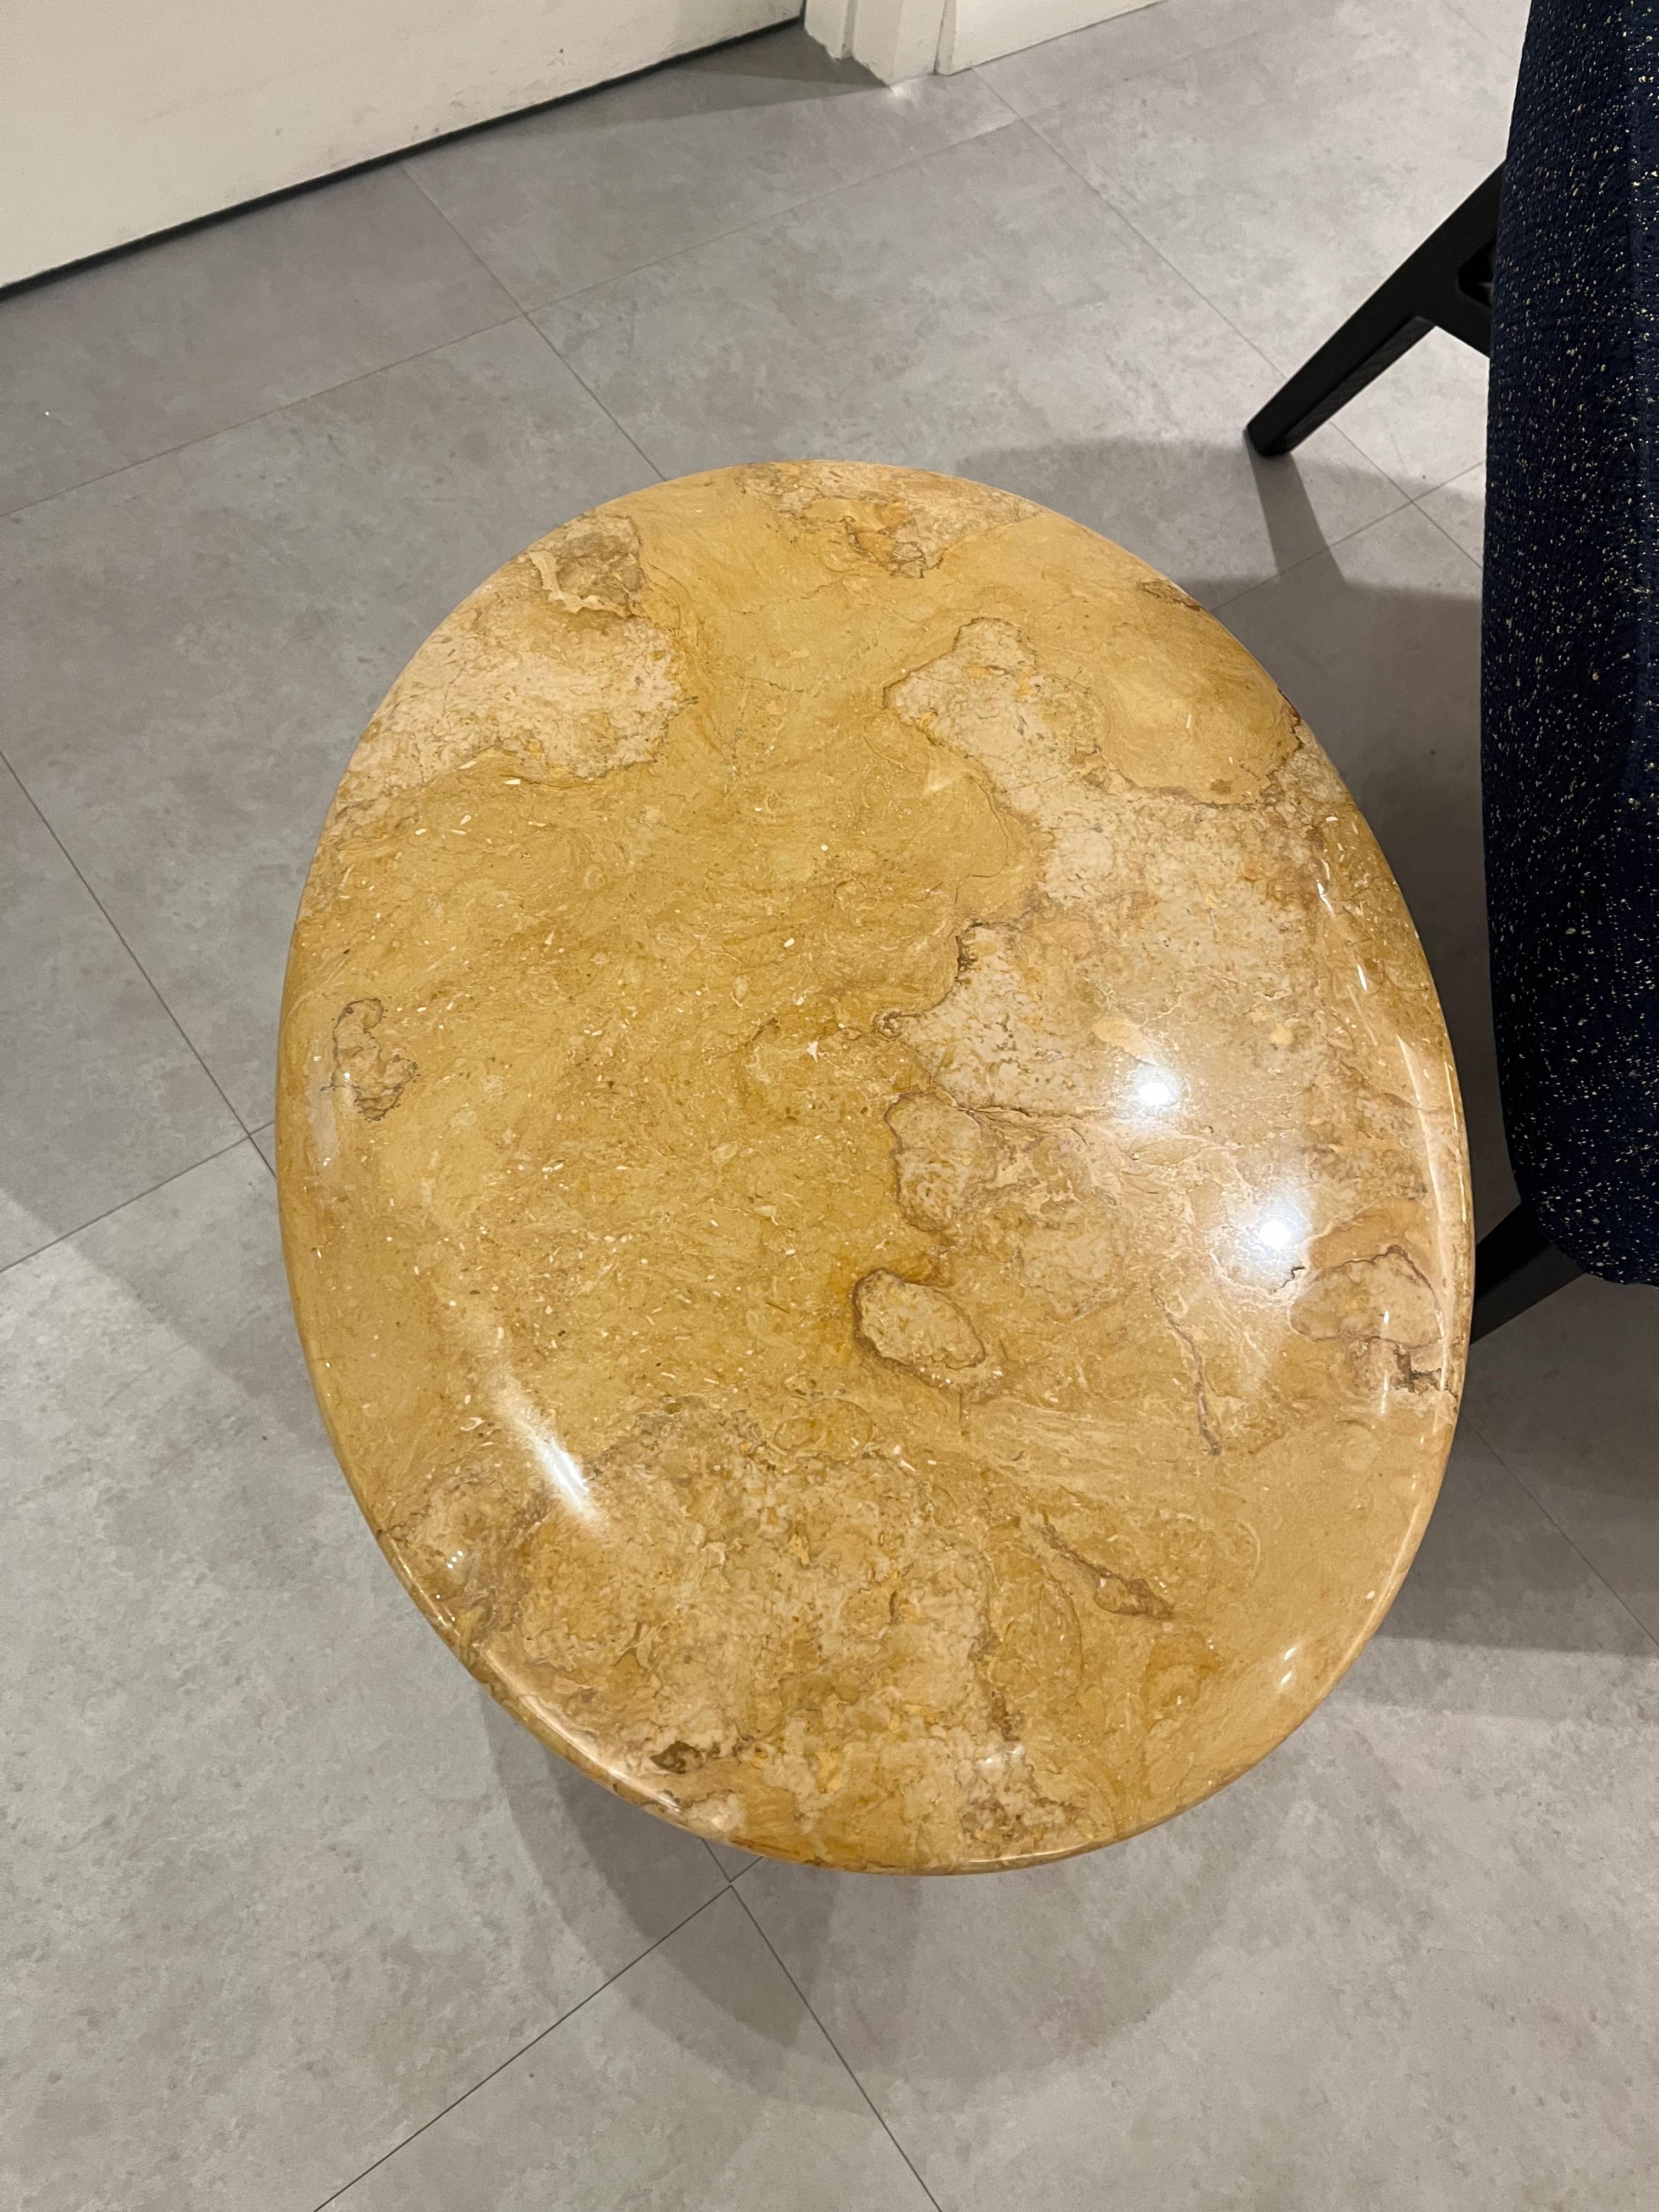 1)Antilles Giallo Table 52 x 40 h = 45 cm
Marble Giallo Reale
Base: leather covered Color black
Glides: felted glides

At the time of the Wiener Werkstätte around the 1900s, Josef Hoffmann designed extravagant brooches made in traditional